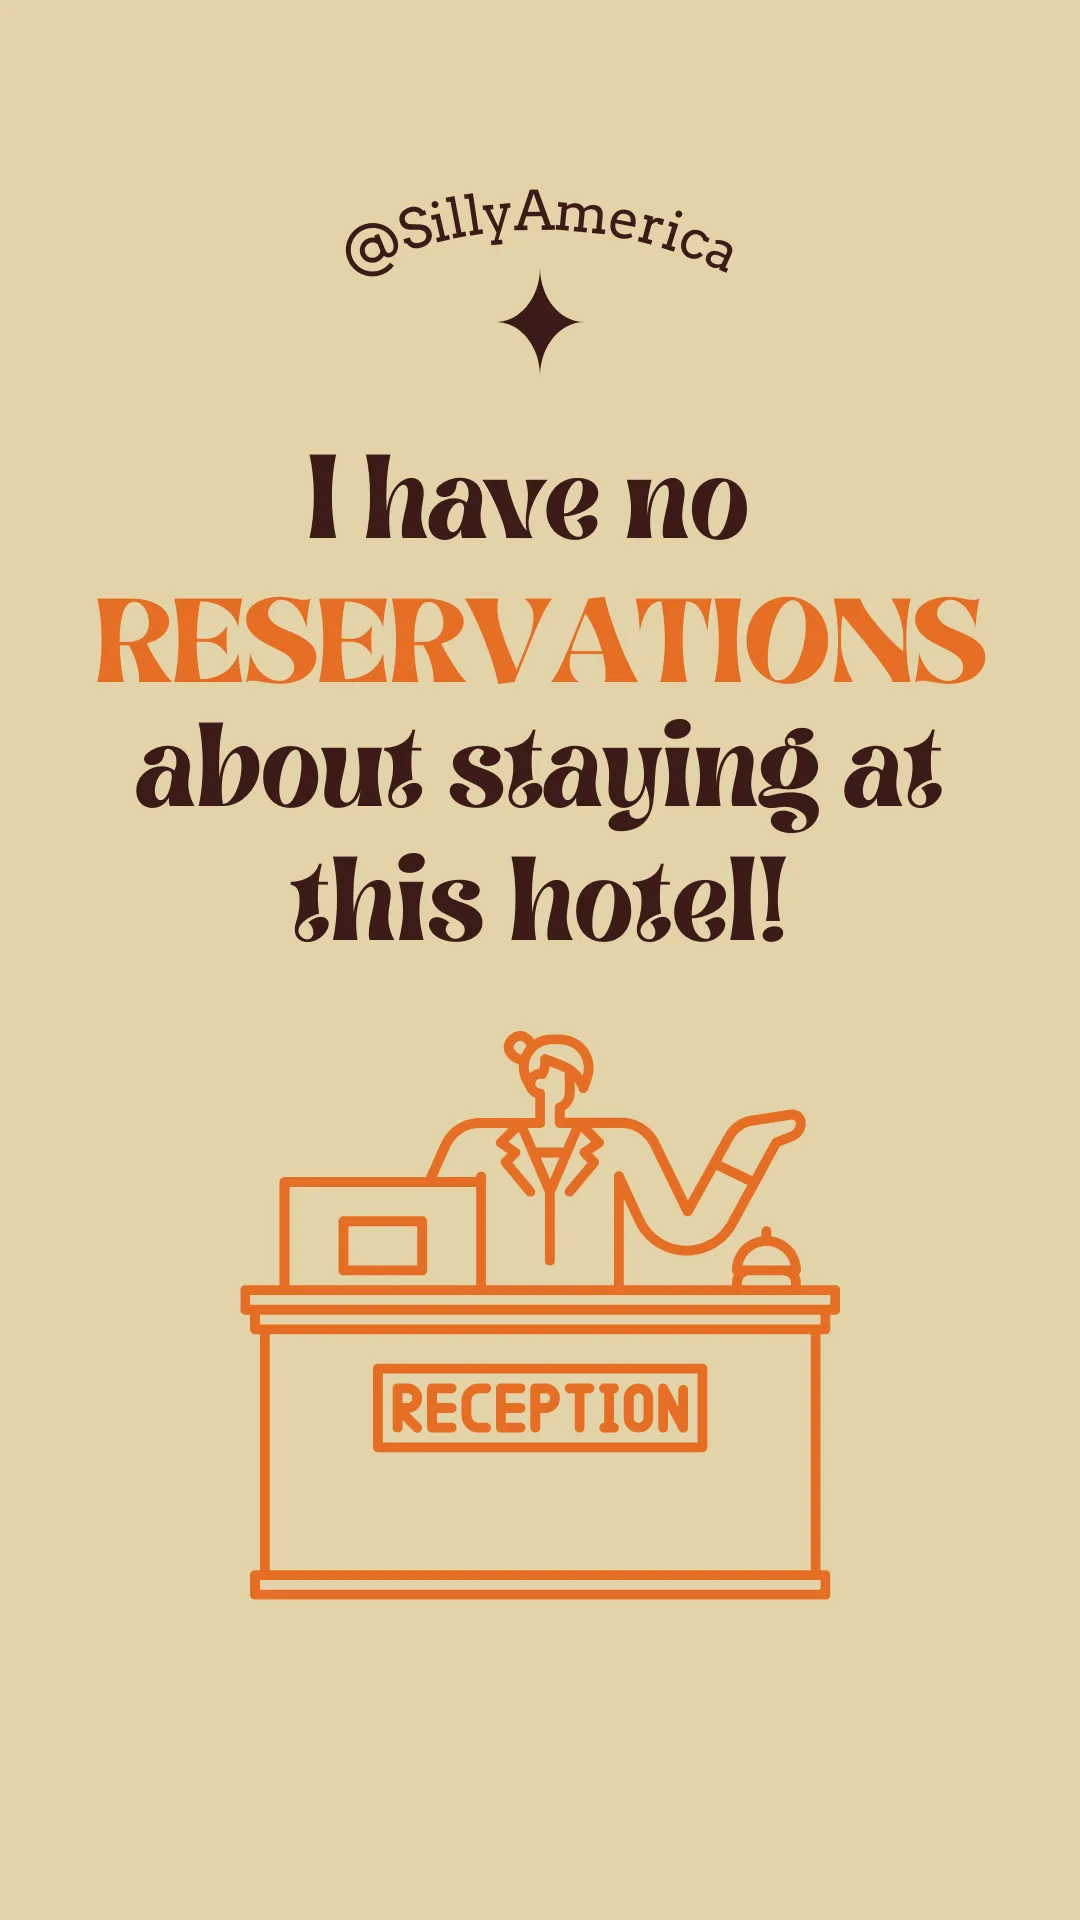 16 Funny Hotel Puns for Social Media - I have no RESERVATIONS about staying at this hotel!